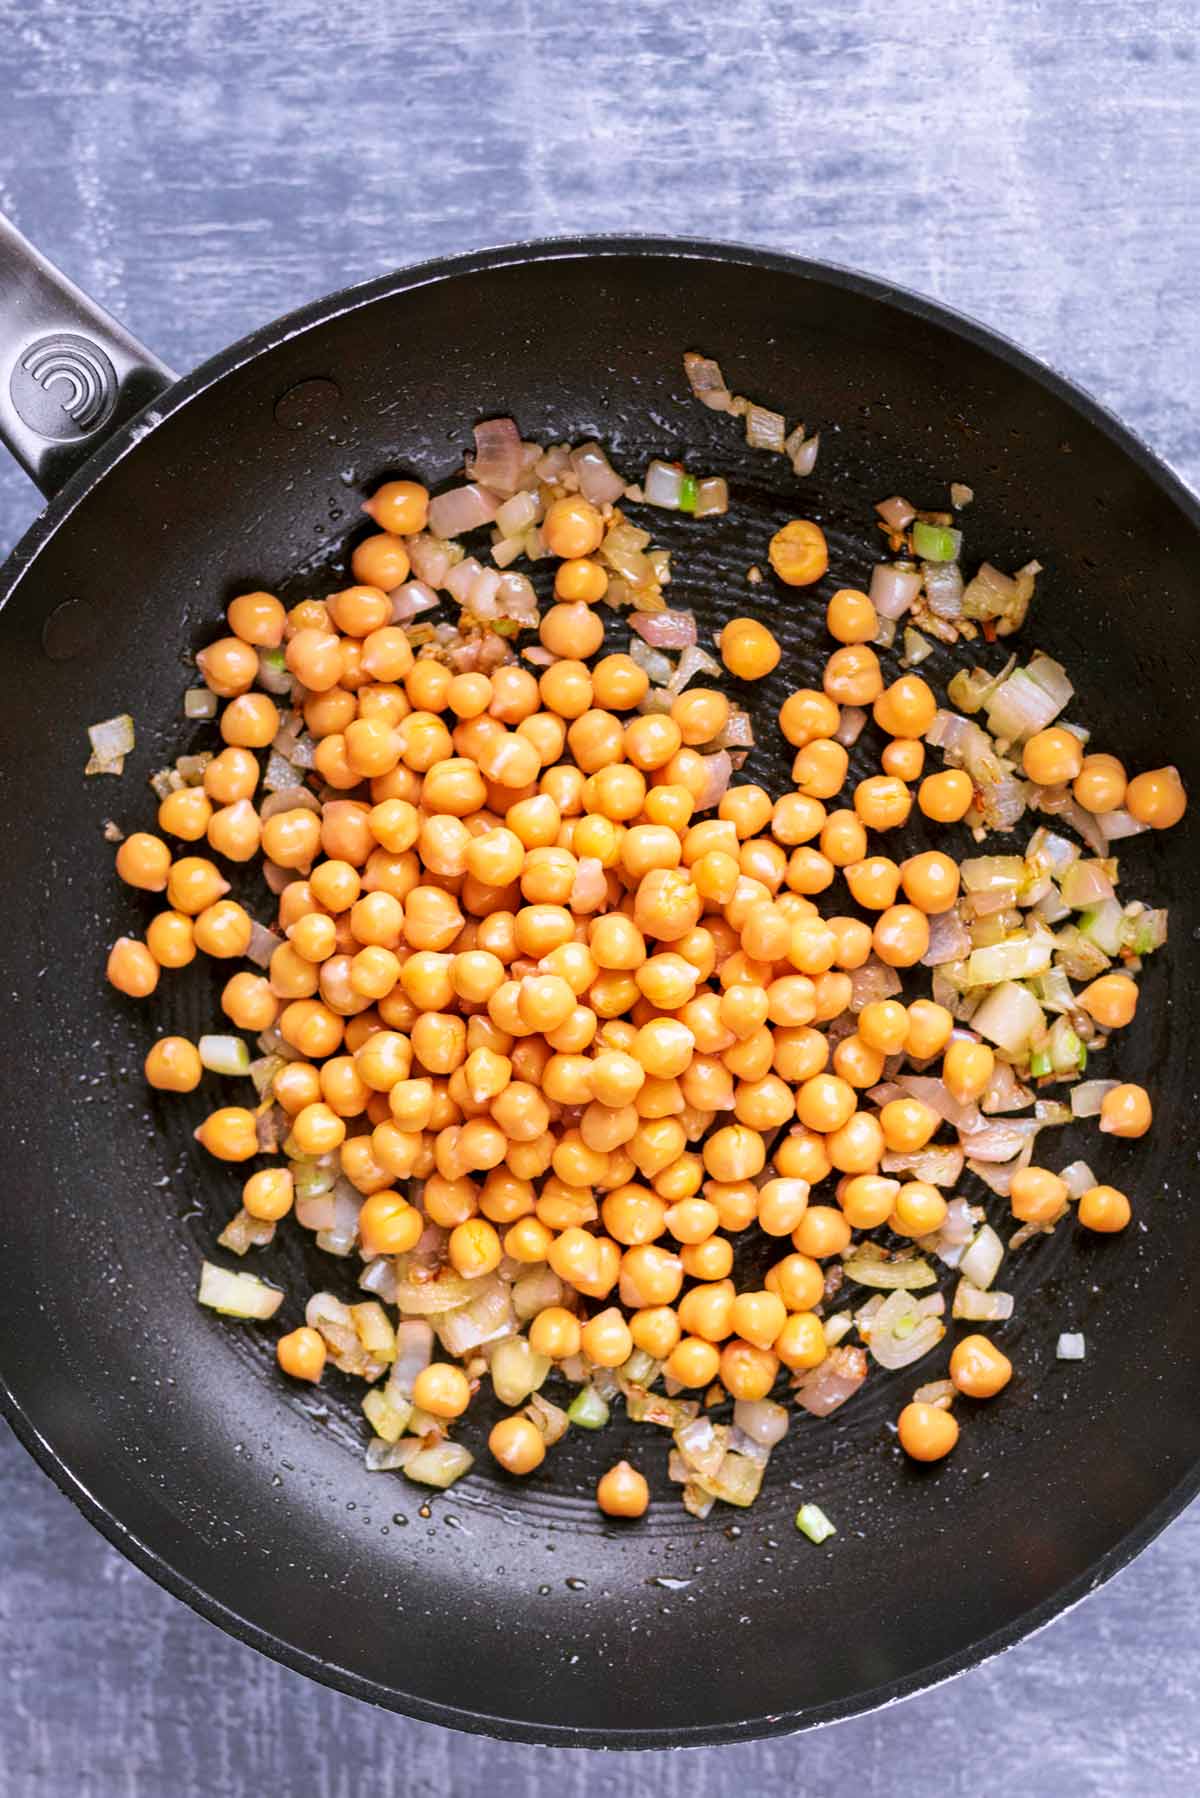 Onions and chickpeas cooking in a frying pan.